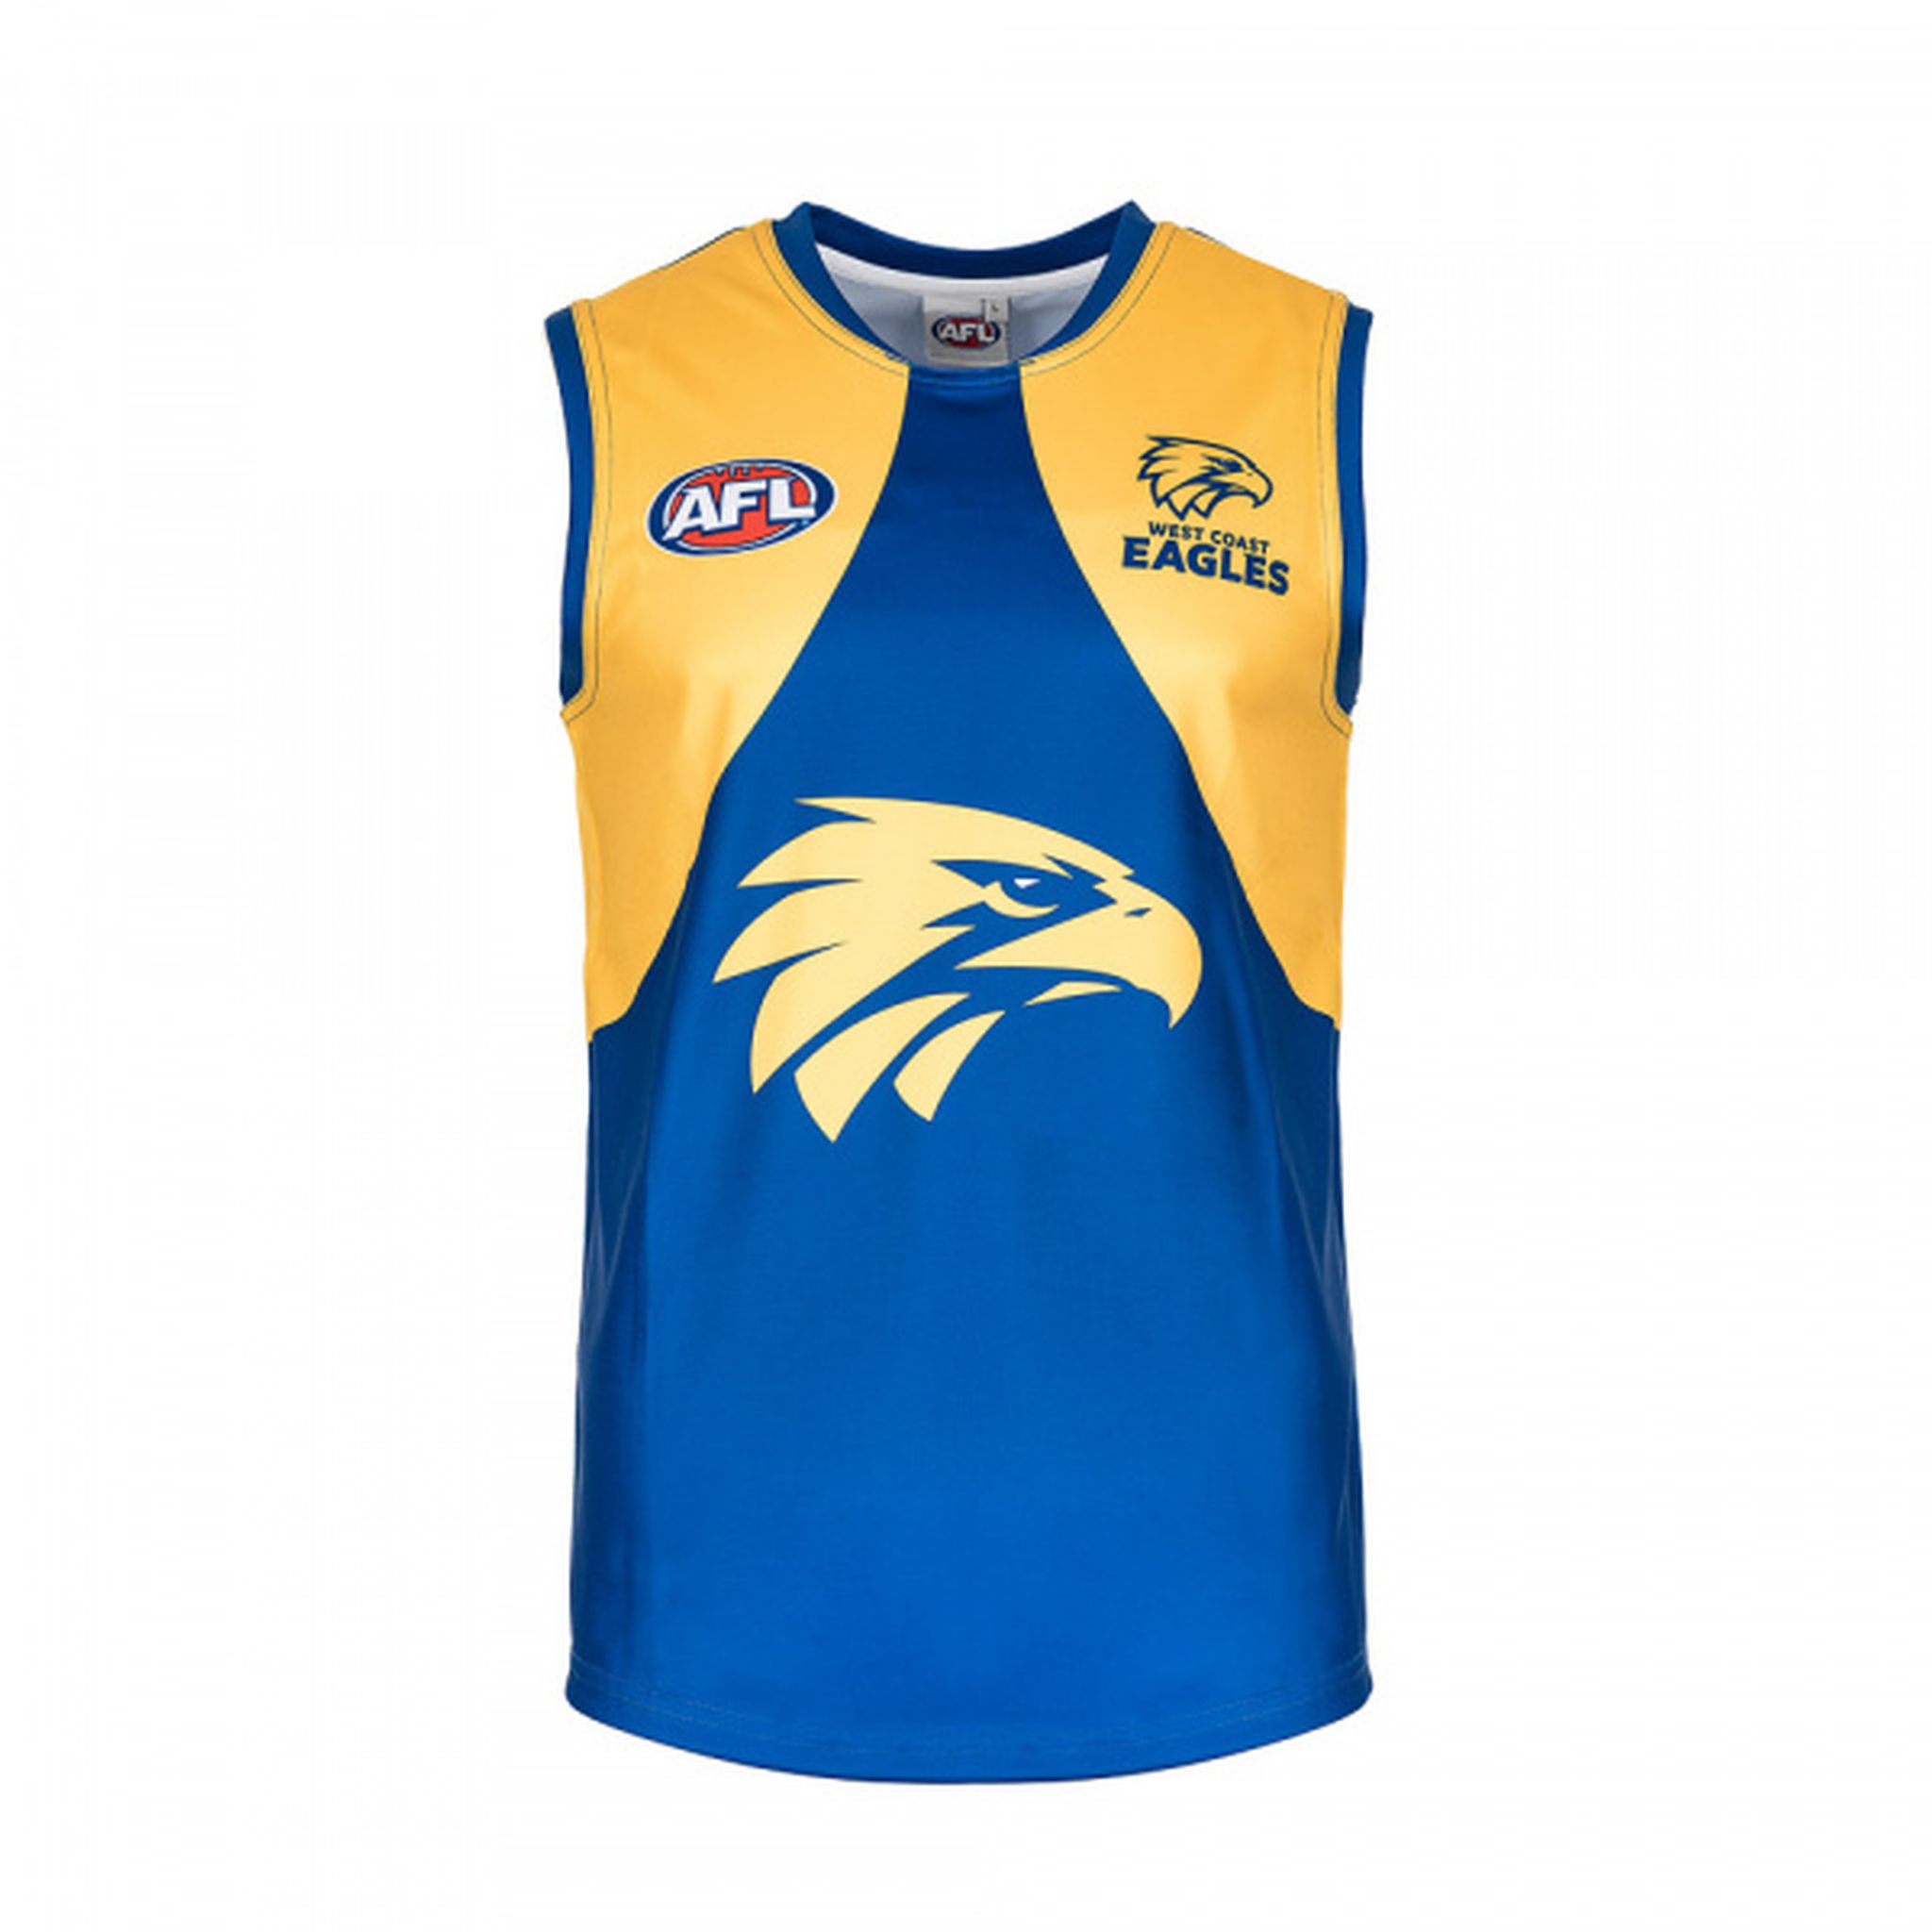 Burley West Coast AFL Home Adults Replica Guernsey